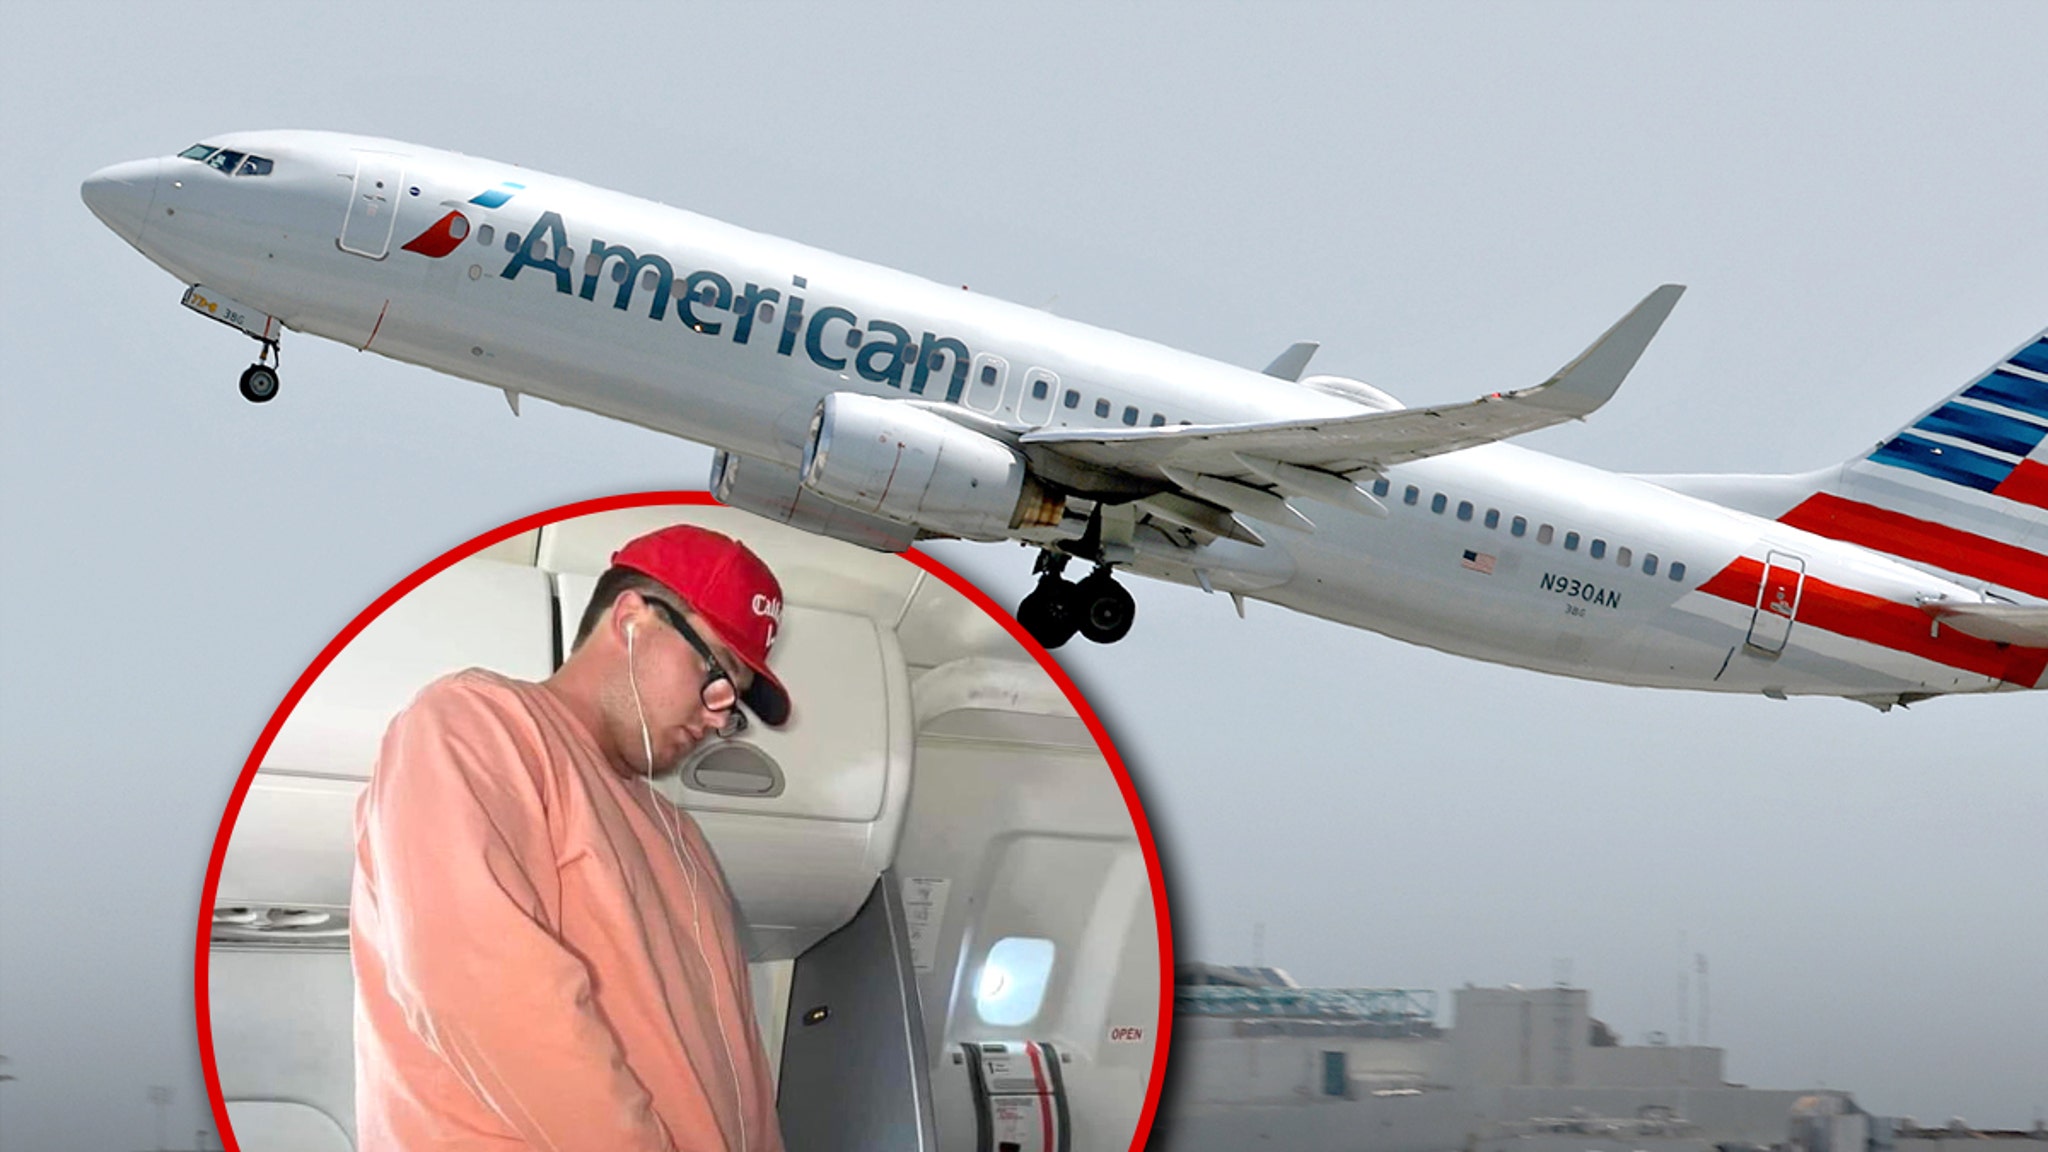 Man Appears to Pee in Middle of Plane Aisle in New Pictures